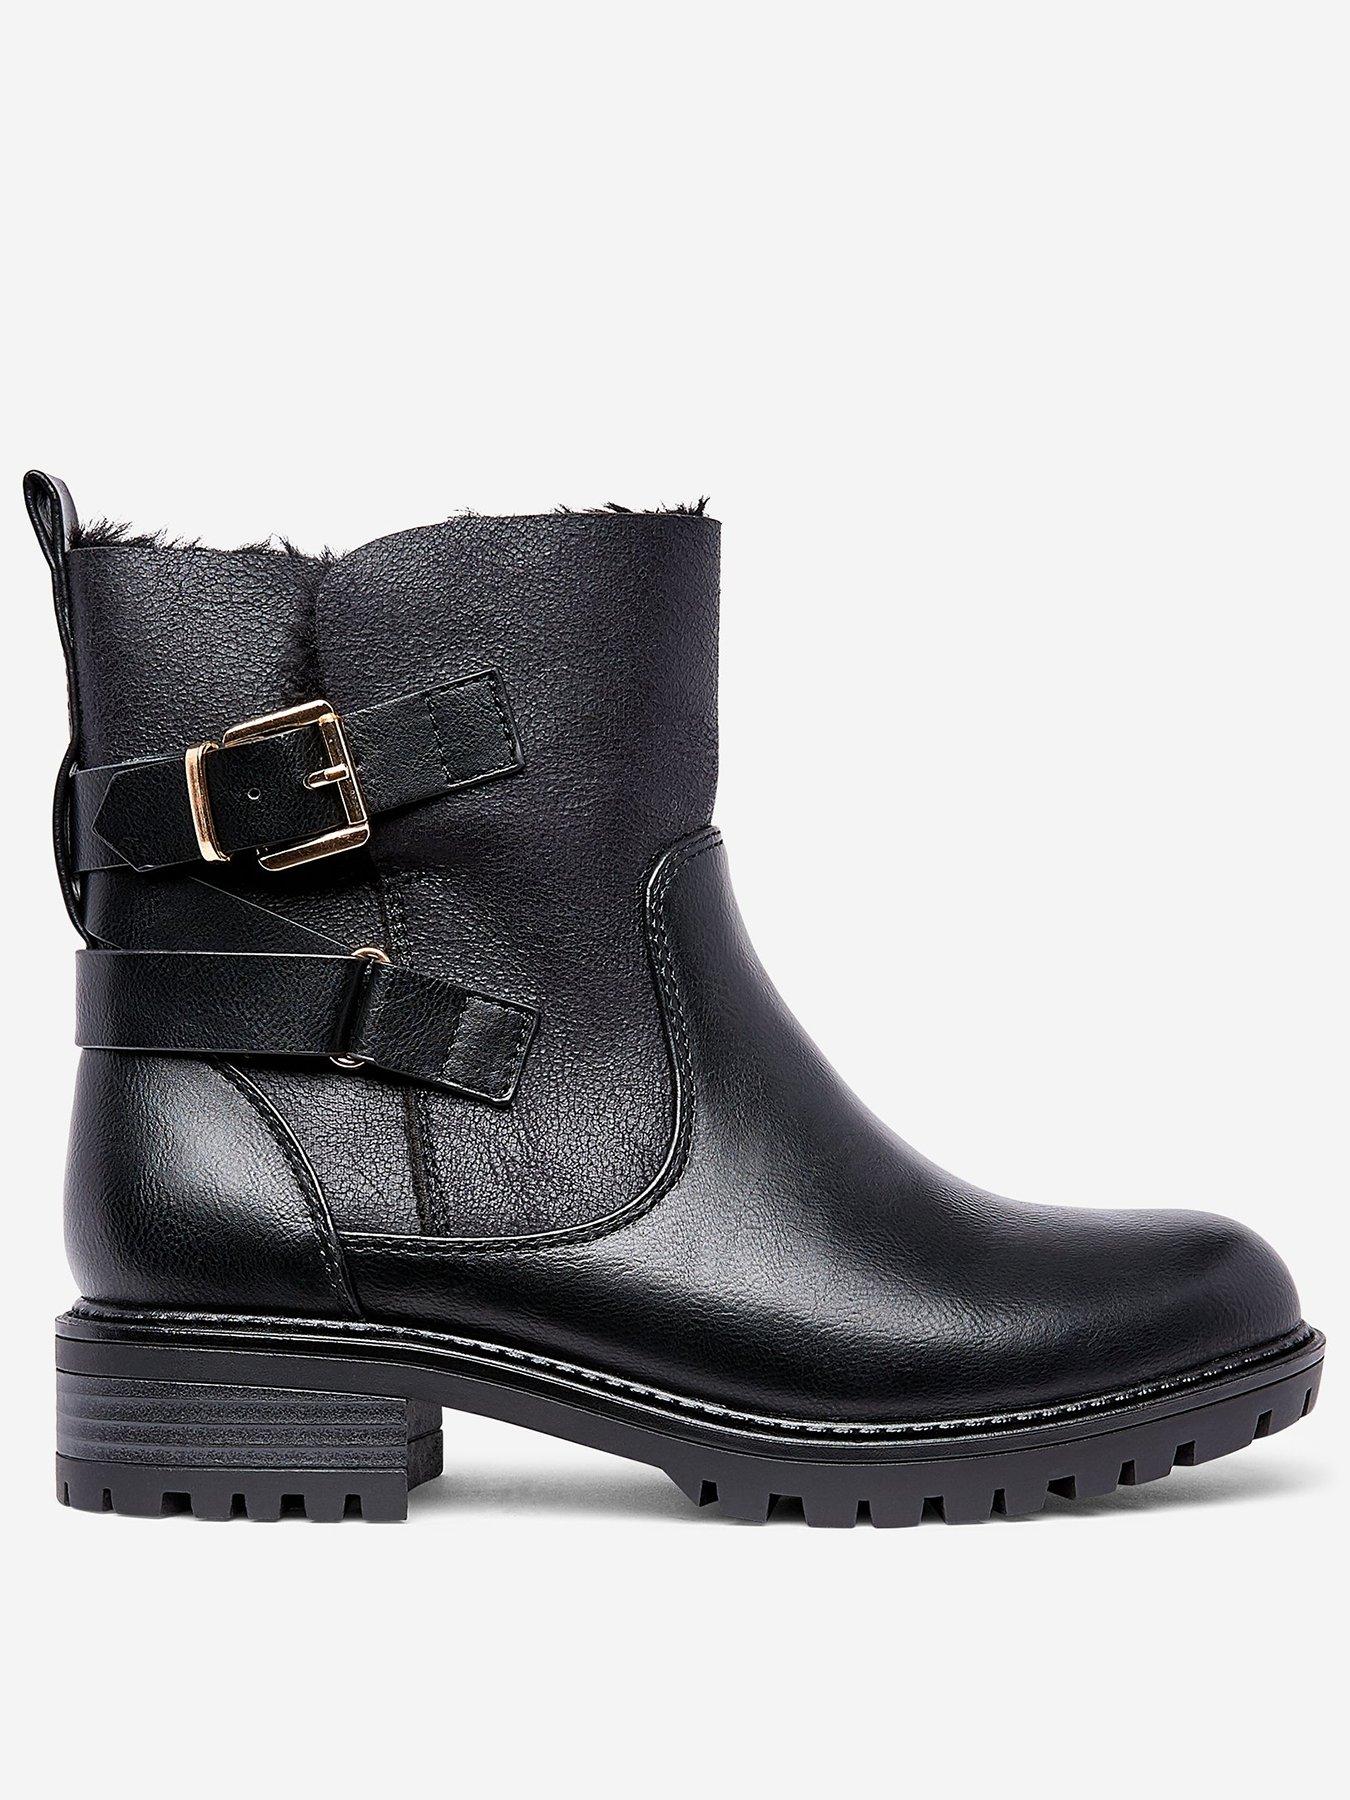 dorothy perkins wide fit boots